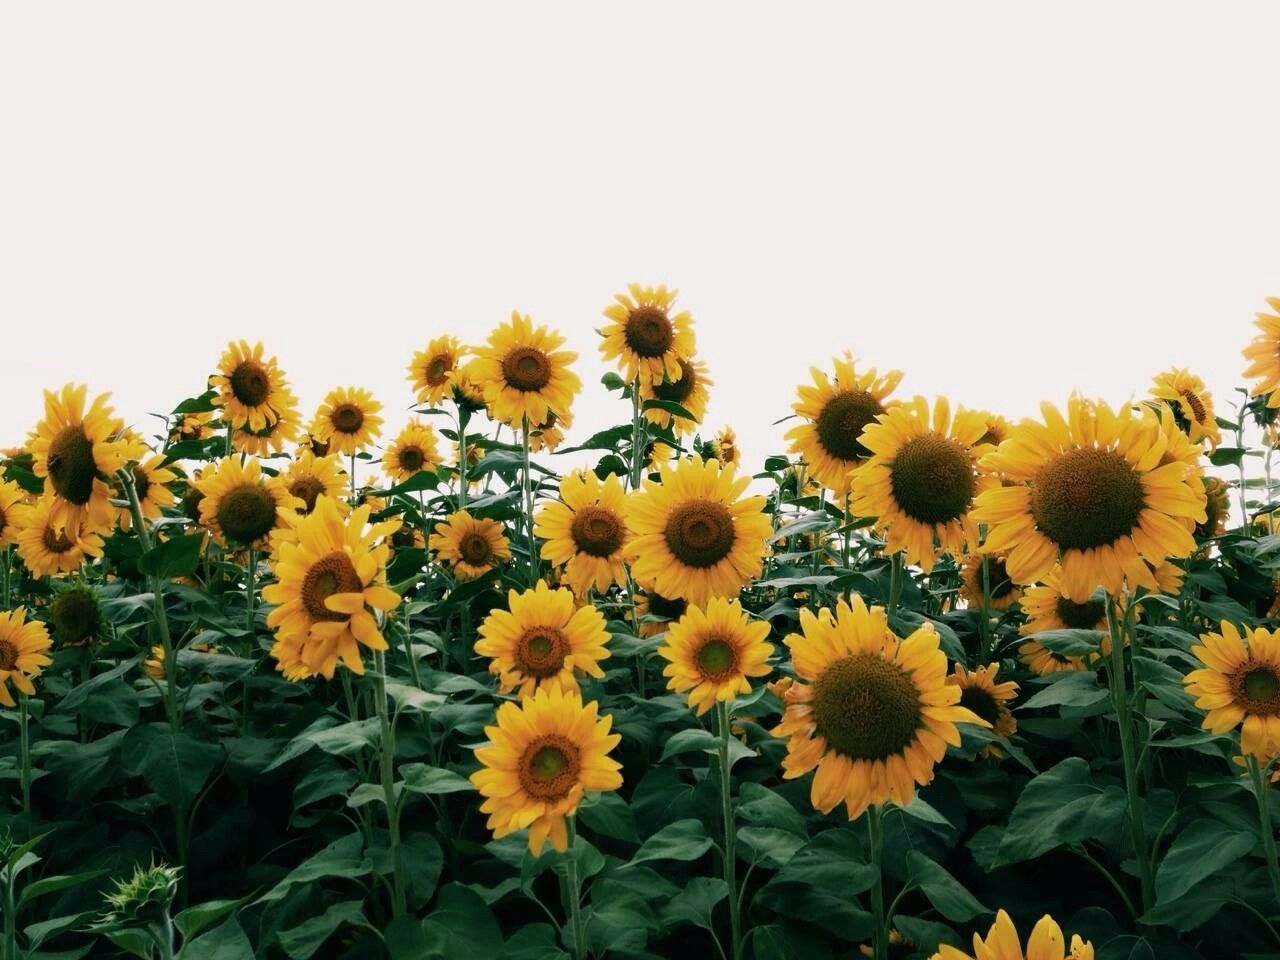 Aesthetic Sunflower Field Wallpapers Wallpaper Cave.